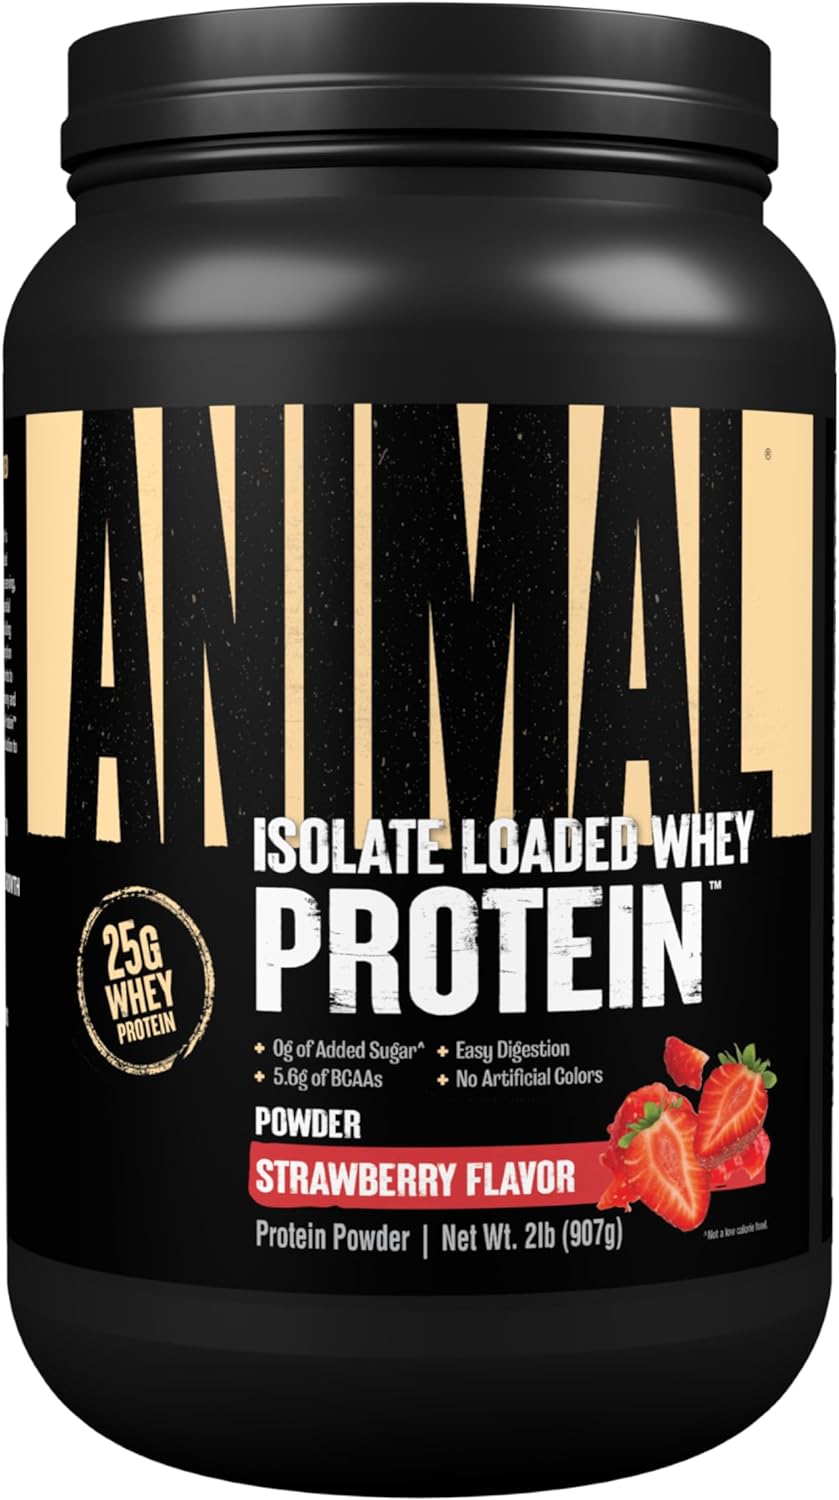 Animal Whey Isolate Whey Protein Powder ? Isolate Loaded for Post Workout and Recovery ? Low Sugar with Highly Digestible Whey Isolate Protein - Strawberry - 2 Pounds, AM48